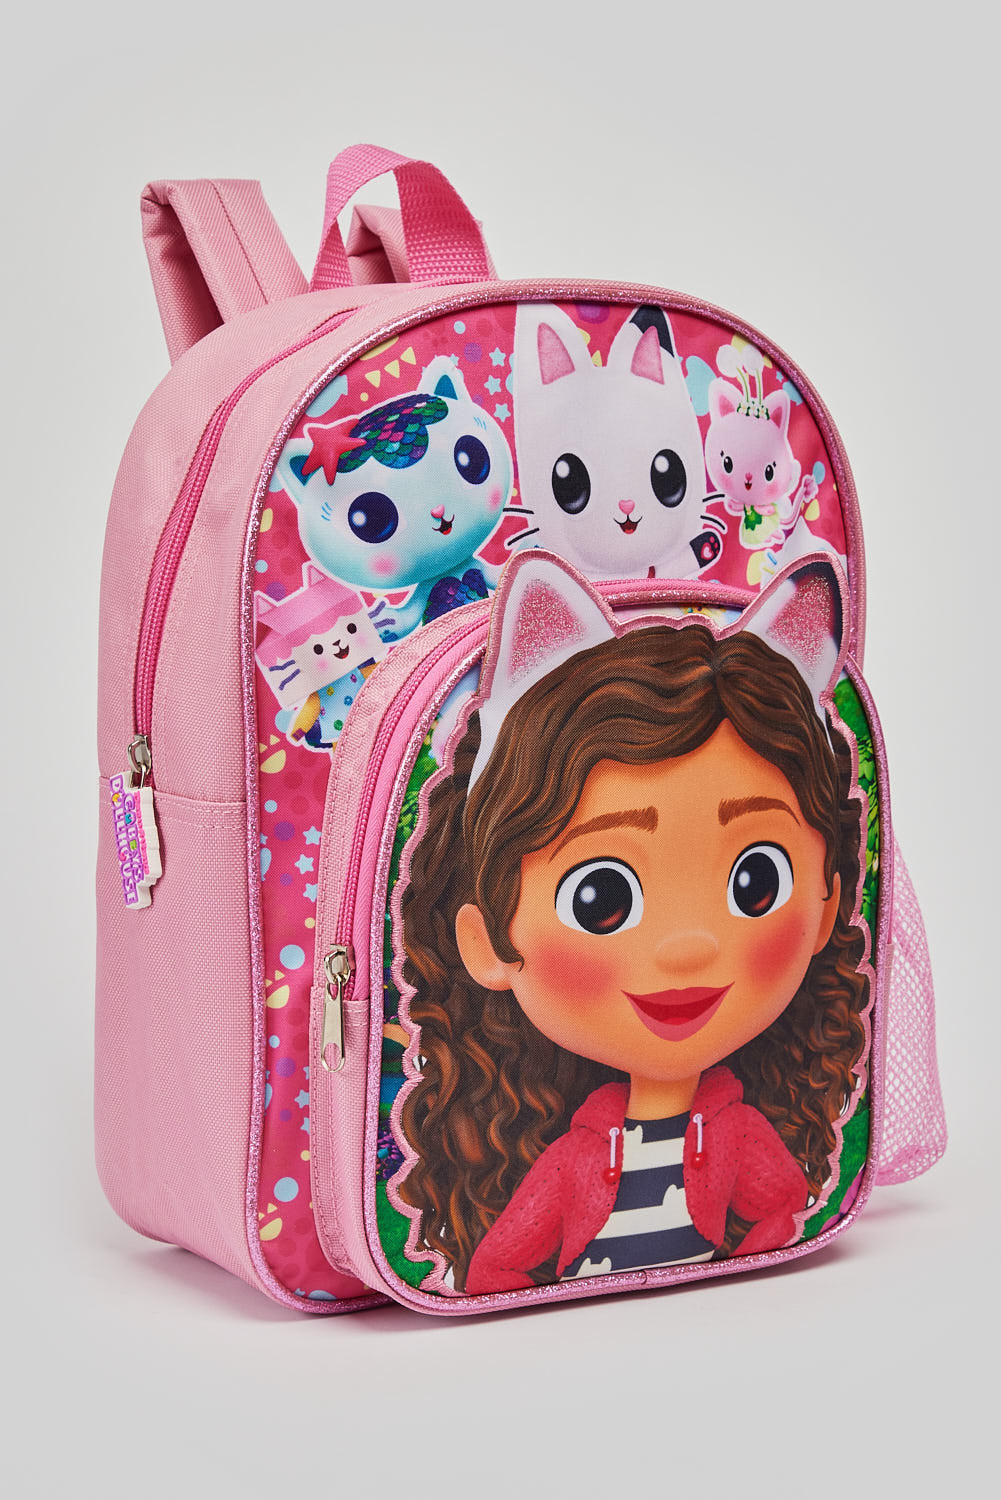 GABBY’S DOLL HOUSE ‘GABBY CATS’ ARCH BACKPACK-(36)